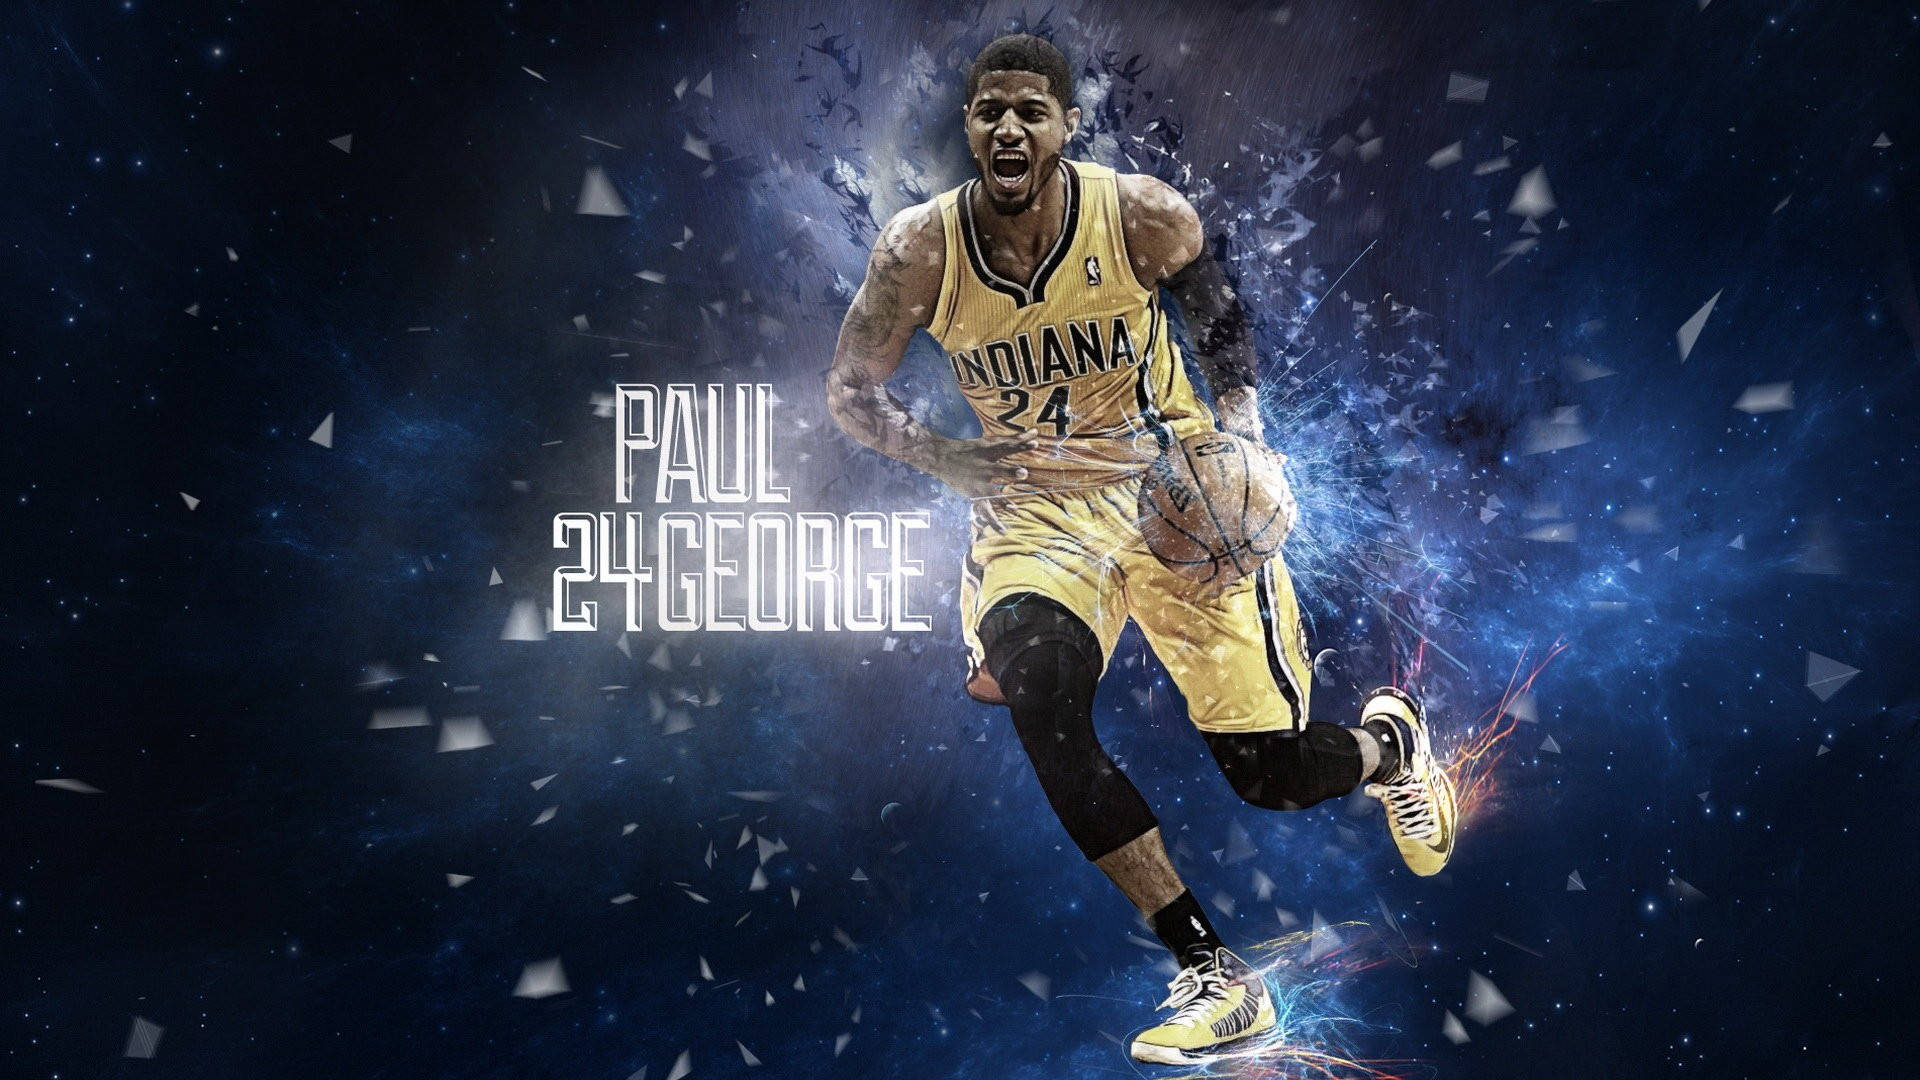 Top 999+ Paul George Wallpapers Full HD, 4K✅Free to Use